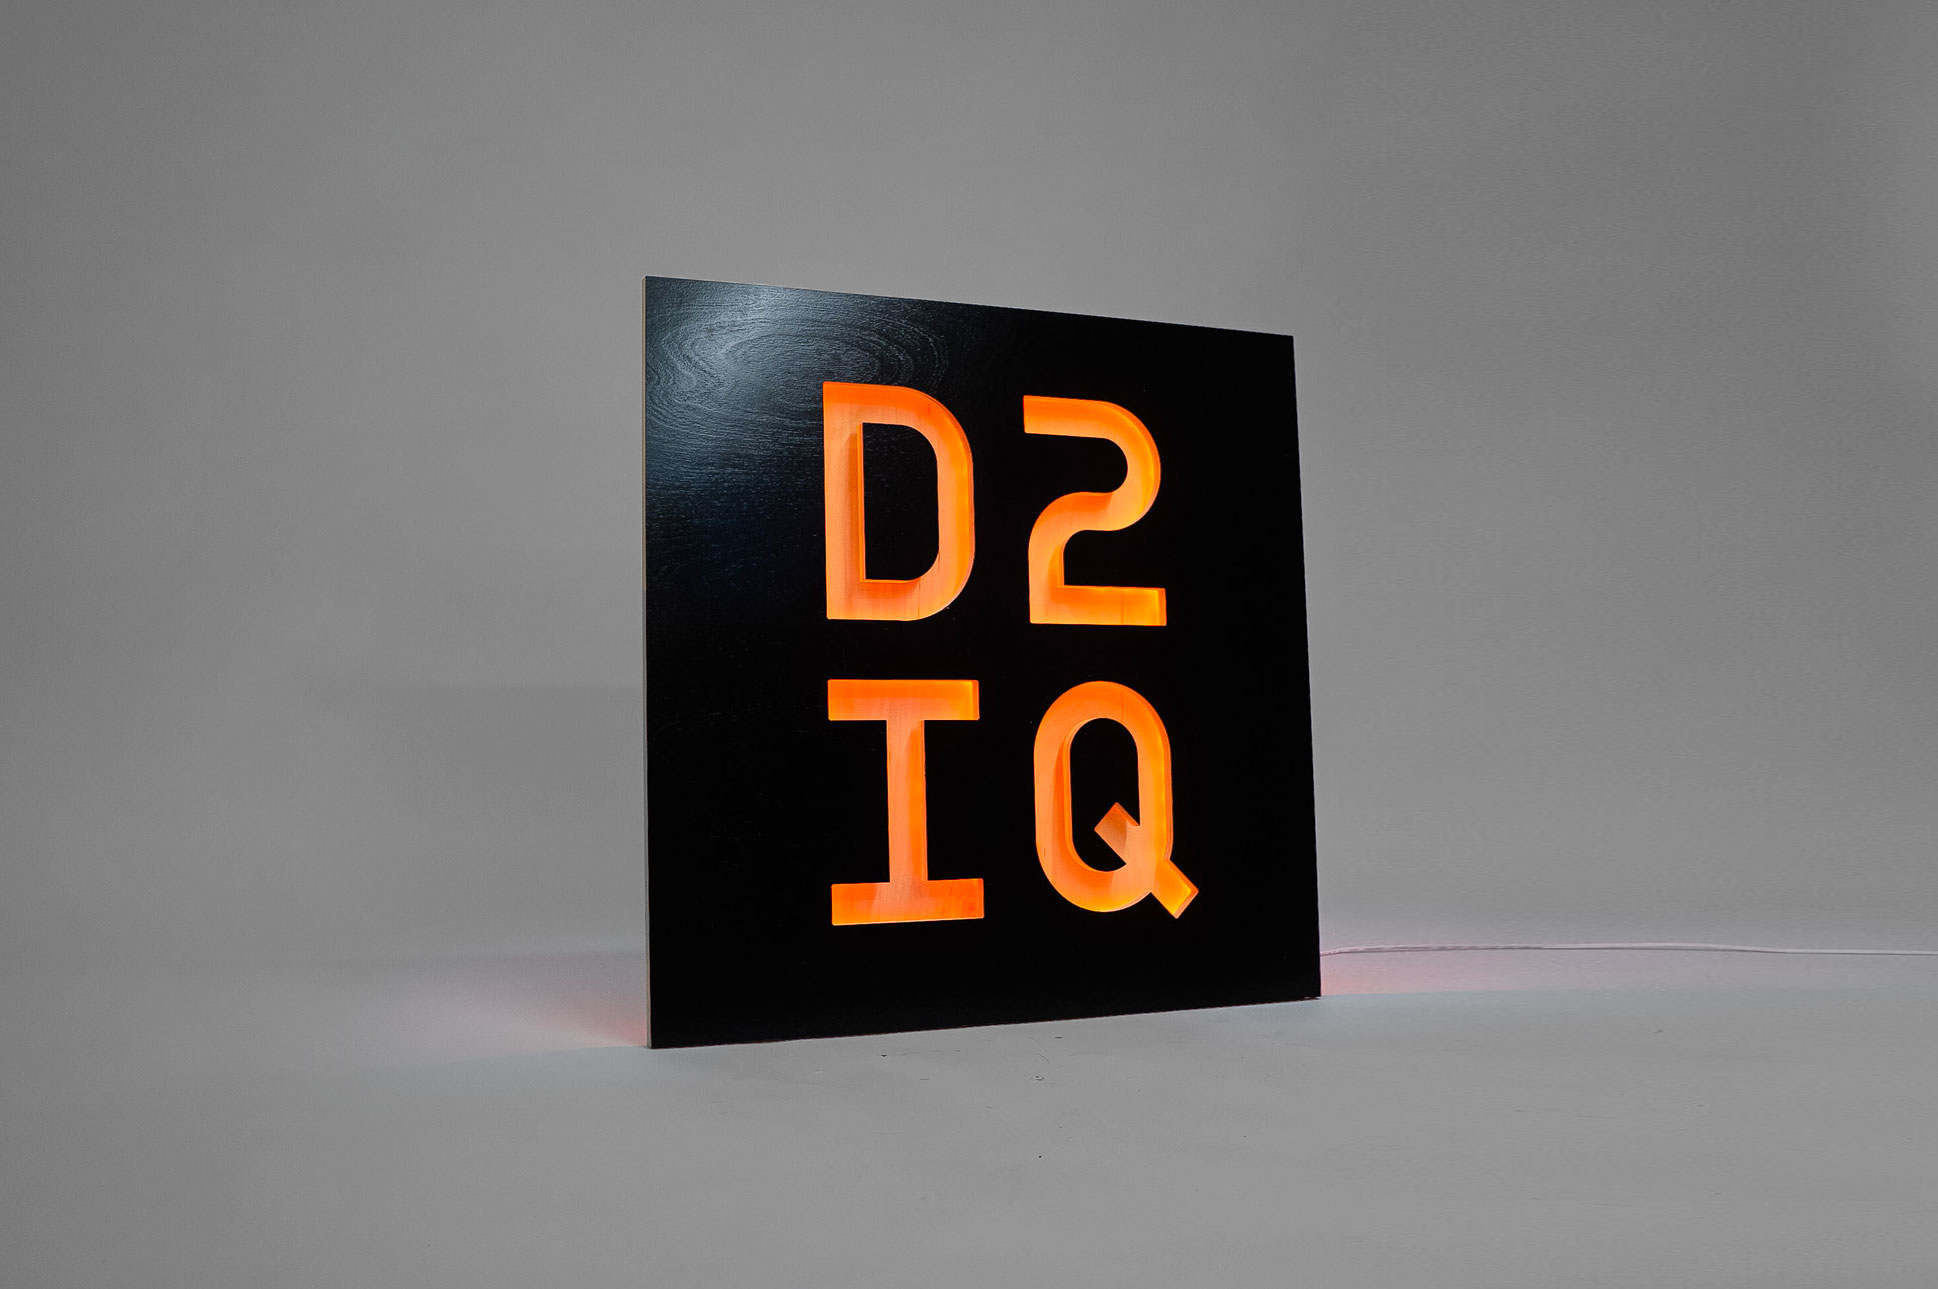 Illuminated, black painted, color changing sign for D2IQ (formerly Mesophere), an American technology company based in San Francisco, CA which develops software for data centers based on Apache Mesos.